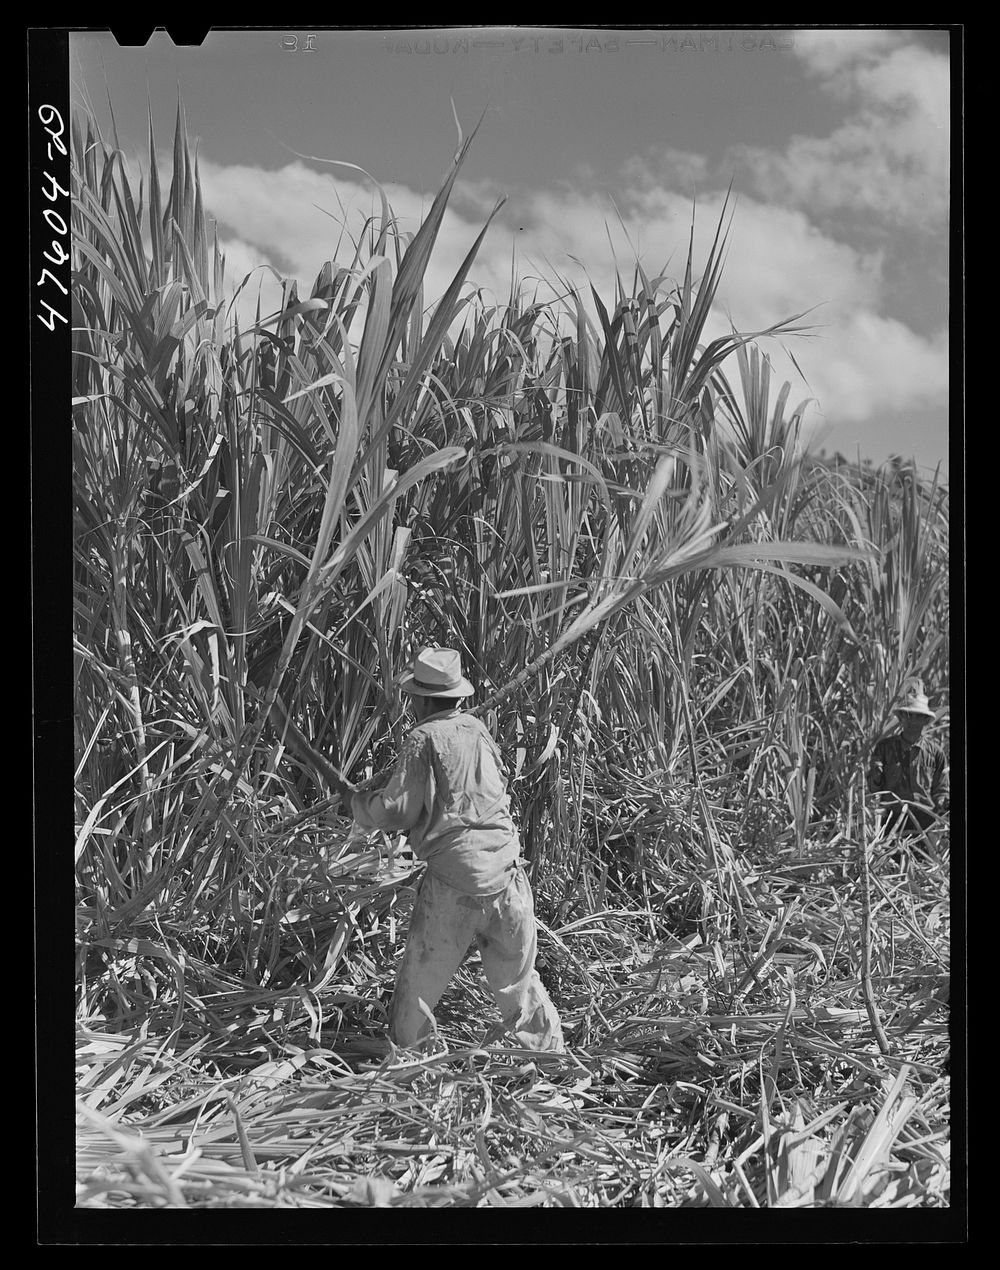 [Untitled photo, possibly related to: Guanica, Puerto Rico (vicinity). Cutting sugar cane in the rich sugar area]. Sourced…